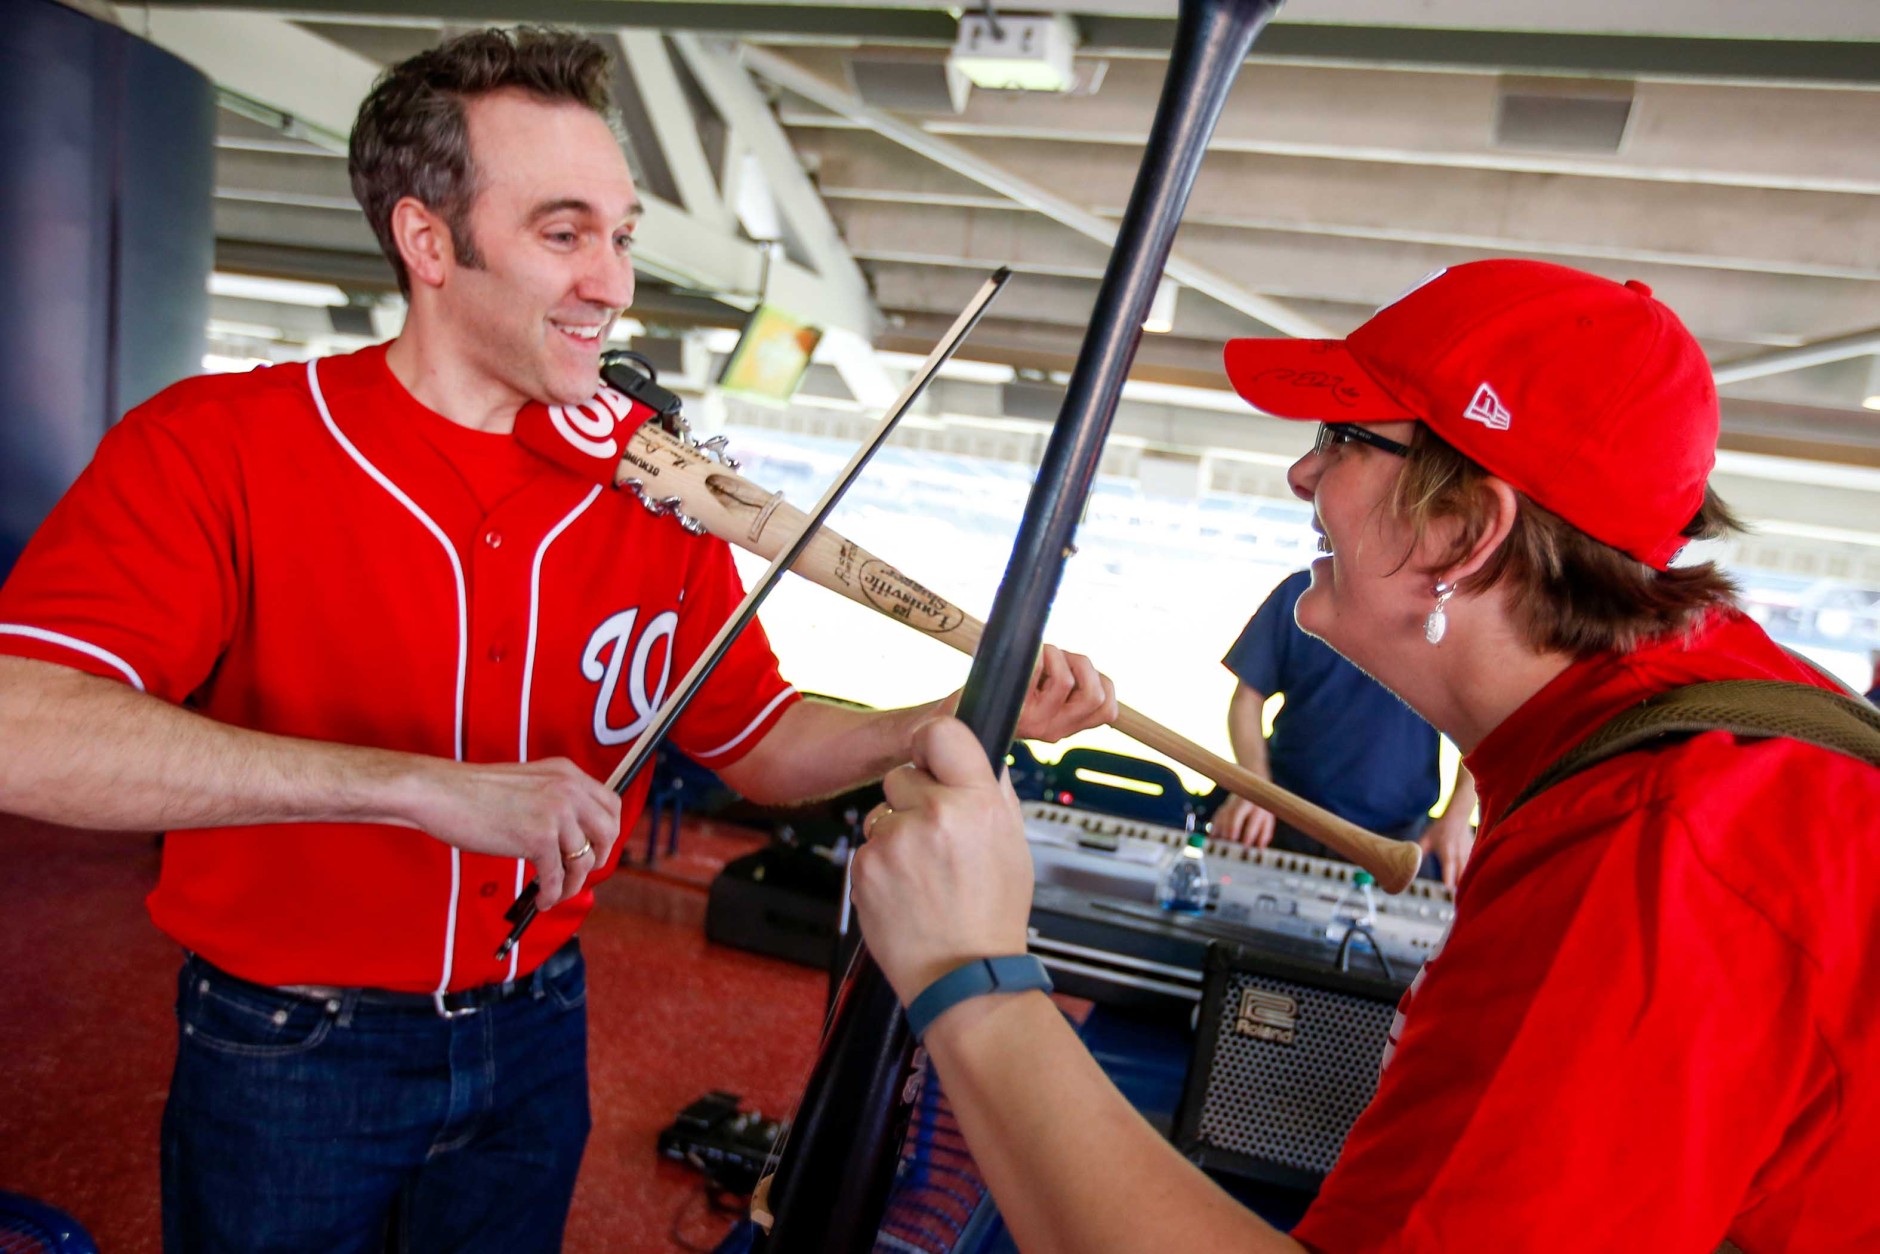 Glenn Donnellan, left, and Anne Marie Karnbach, right, play instruments fashioned out of baseball bats before a baseball game between the Washington Nationals and the New York Mets on opening day at at Nationals Park, Monday, April 6, 2015, in Washington. (AP Photo/Andrew Harnik)